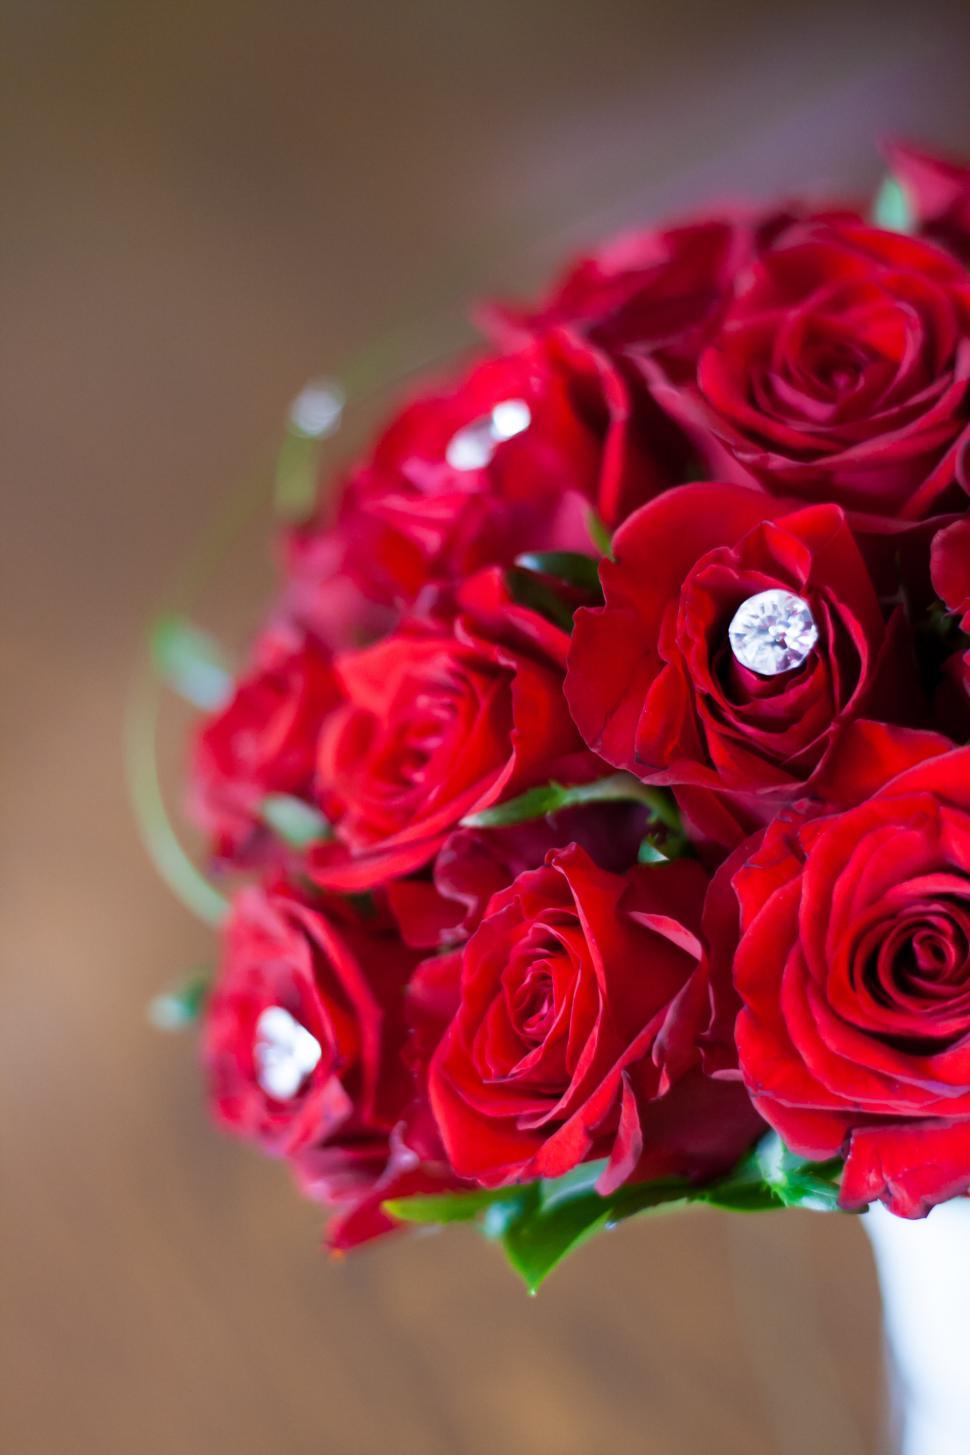 Free Image of Bouquet of Red Roses in White Vase 